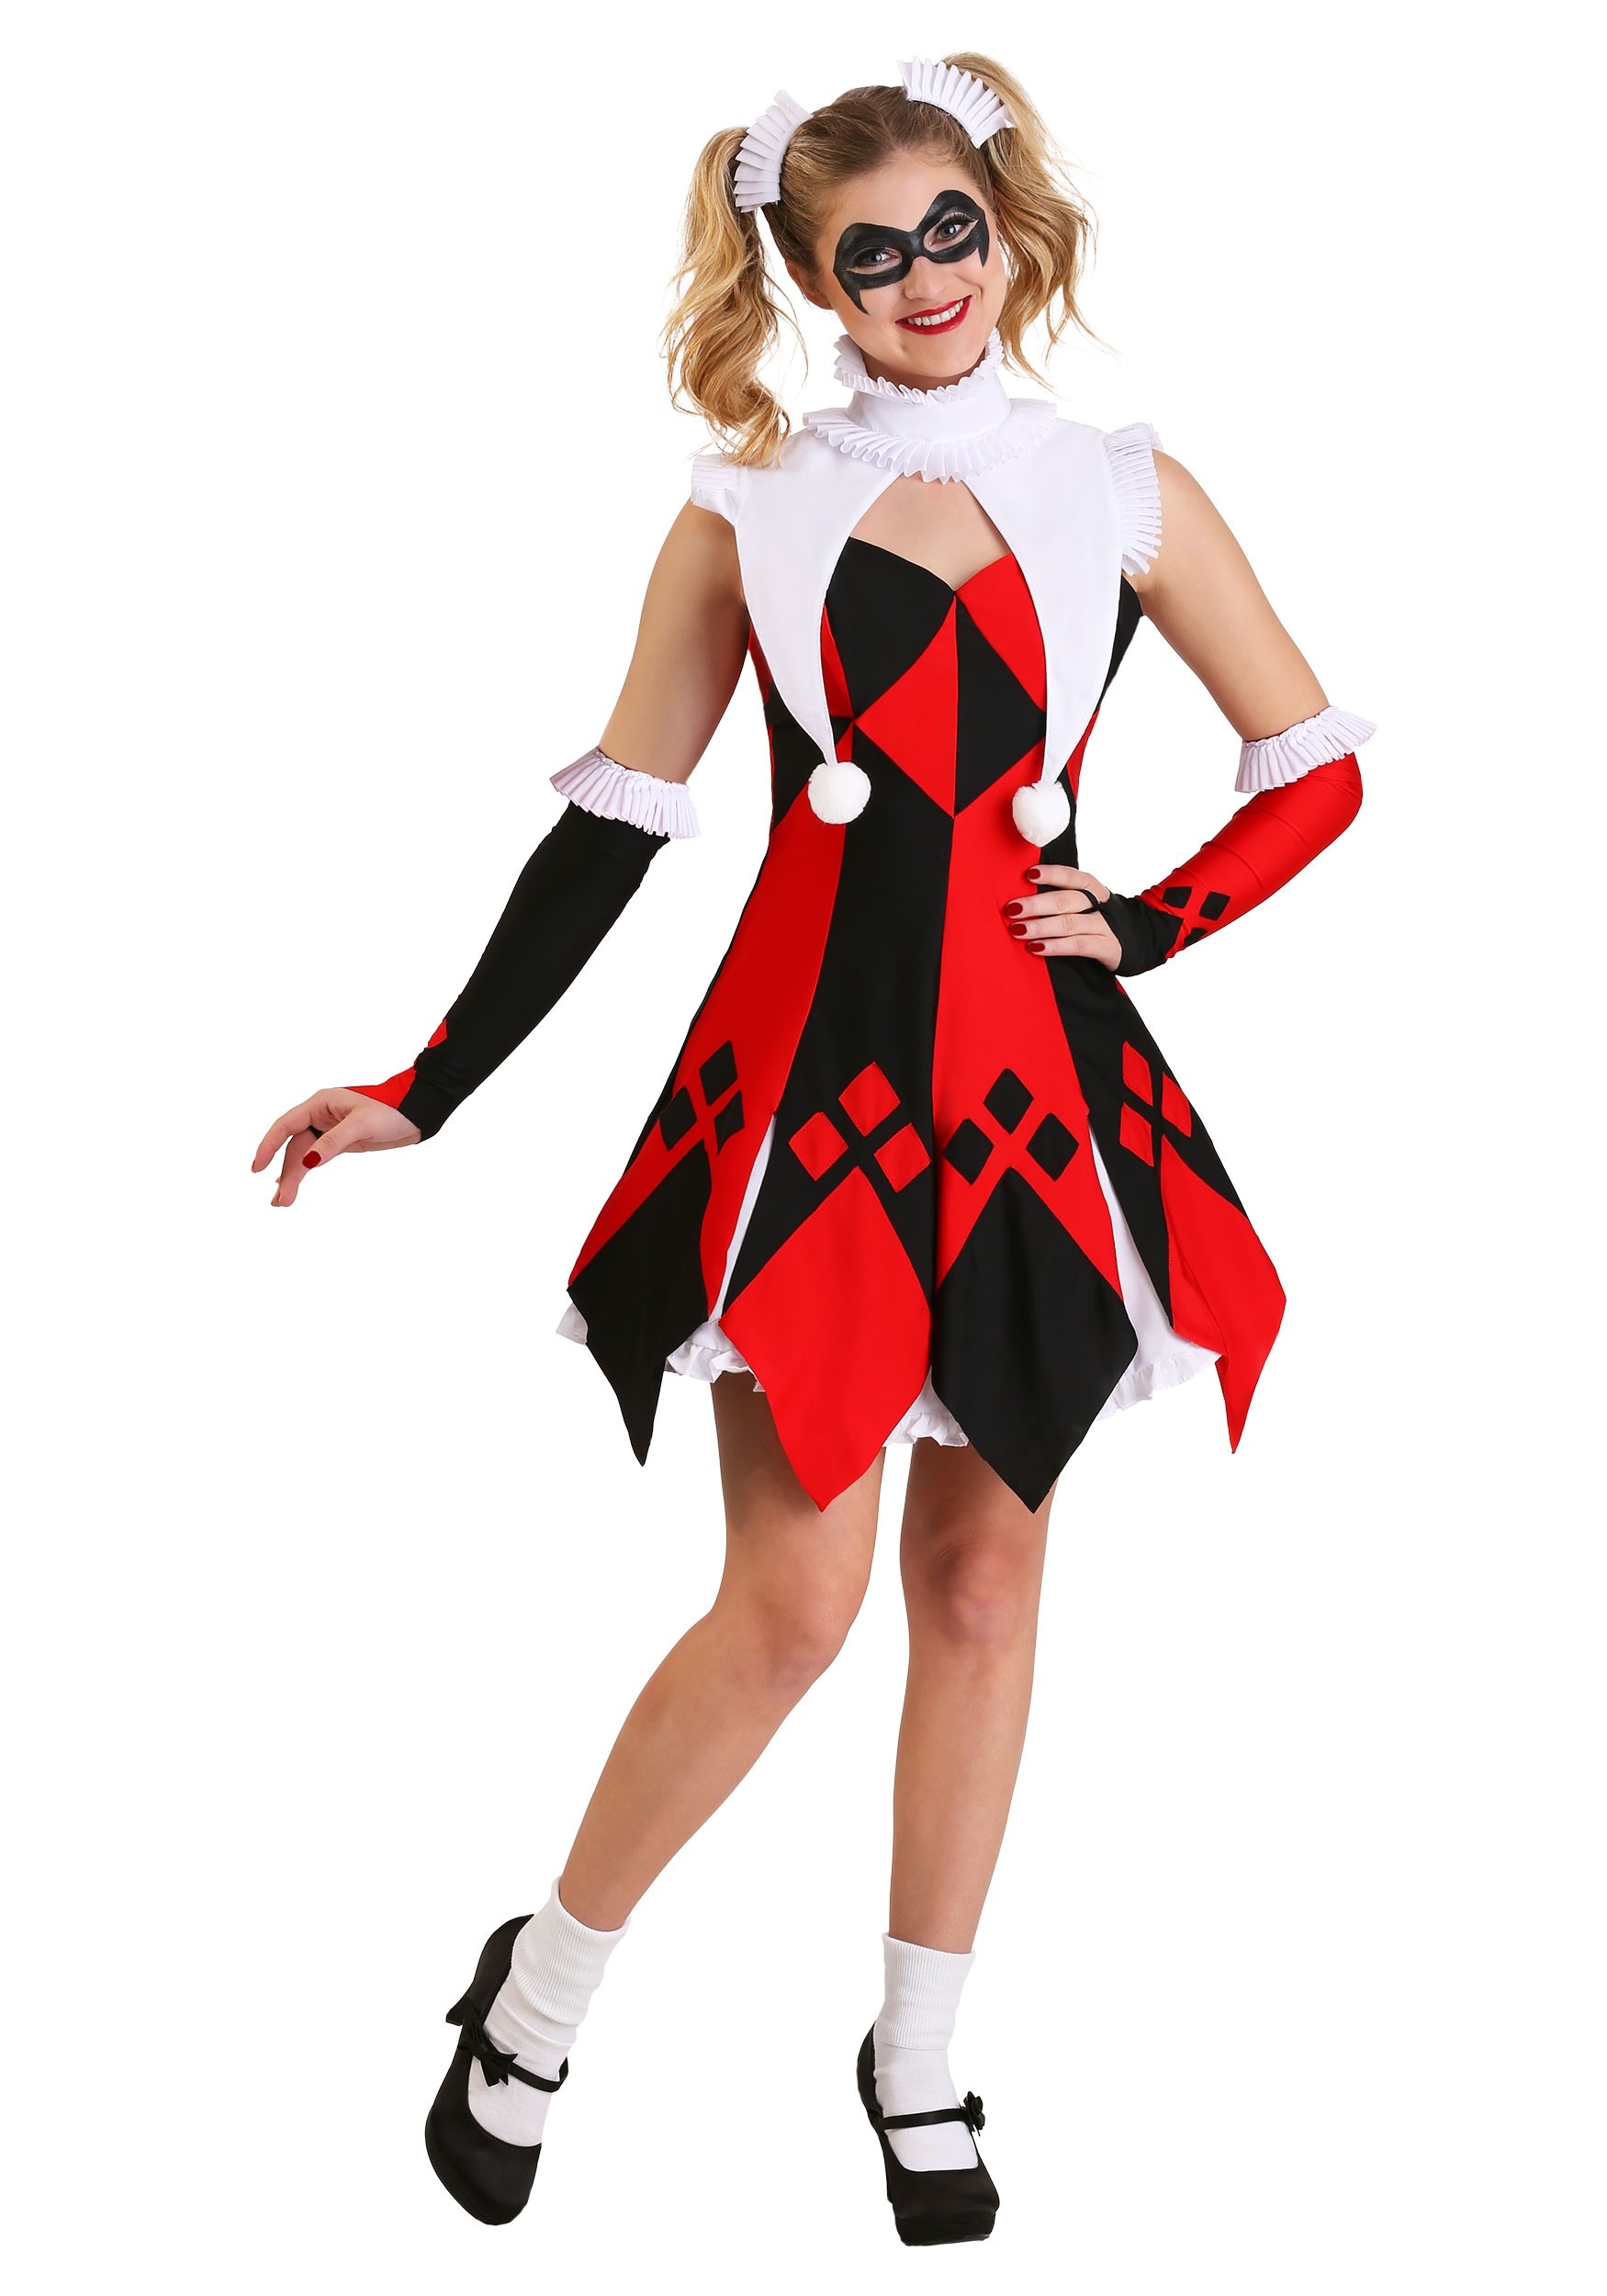 Photos - Fancy Dress FUN Costumes Cute Court Jester Costume for Women Black/Red/White